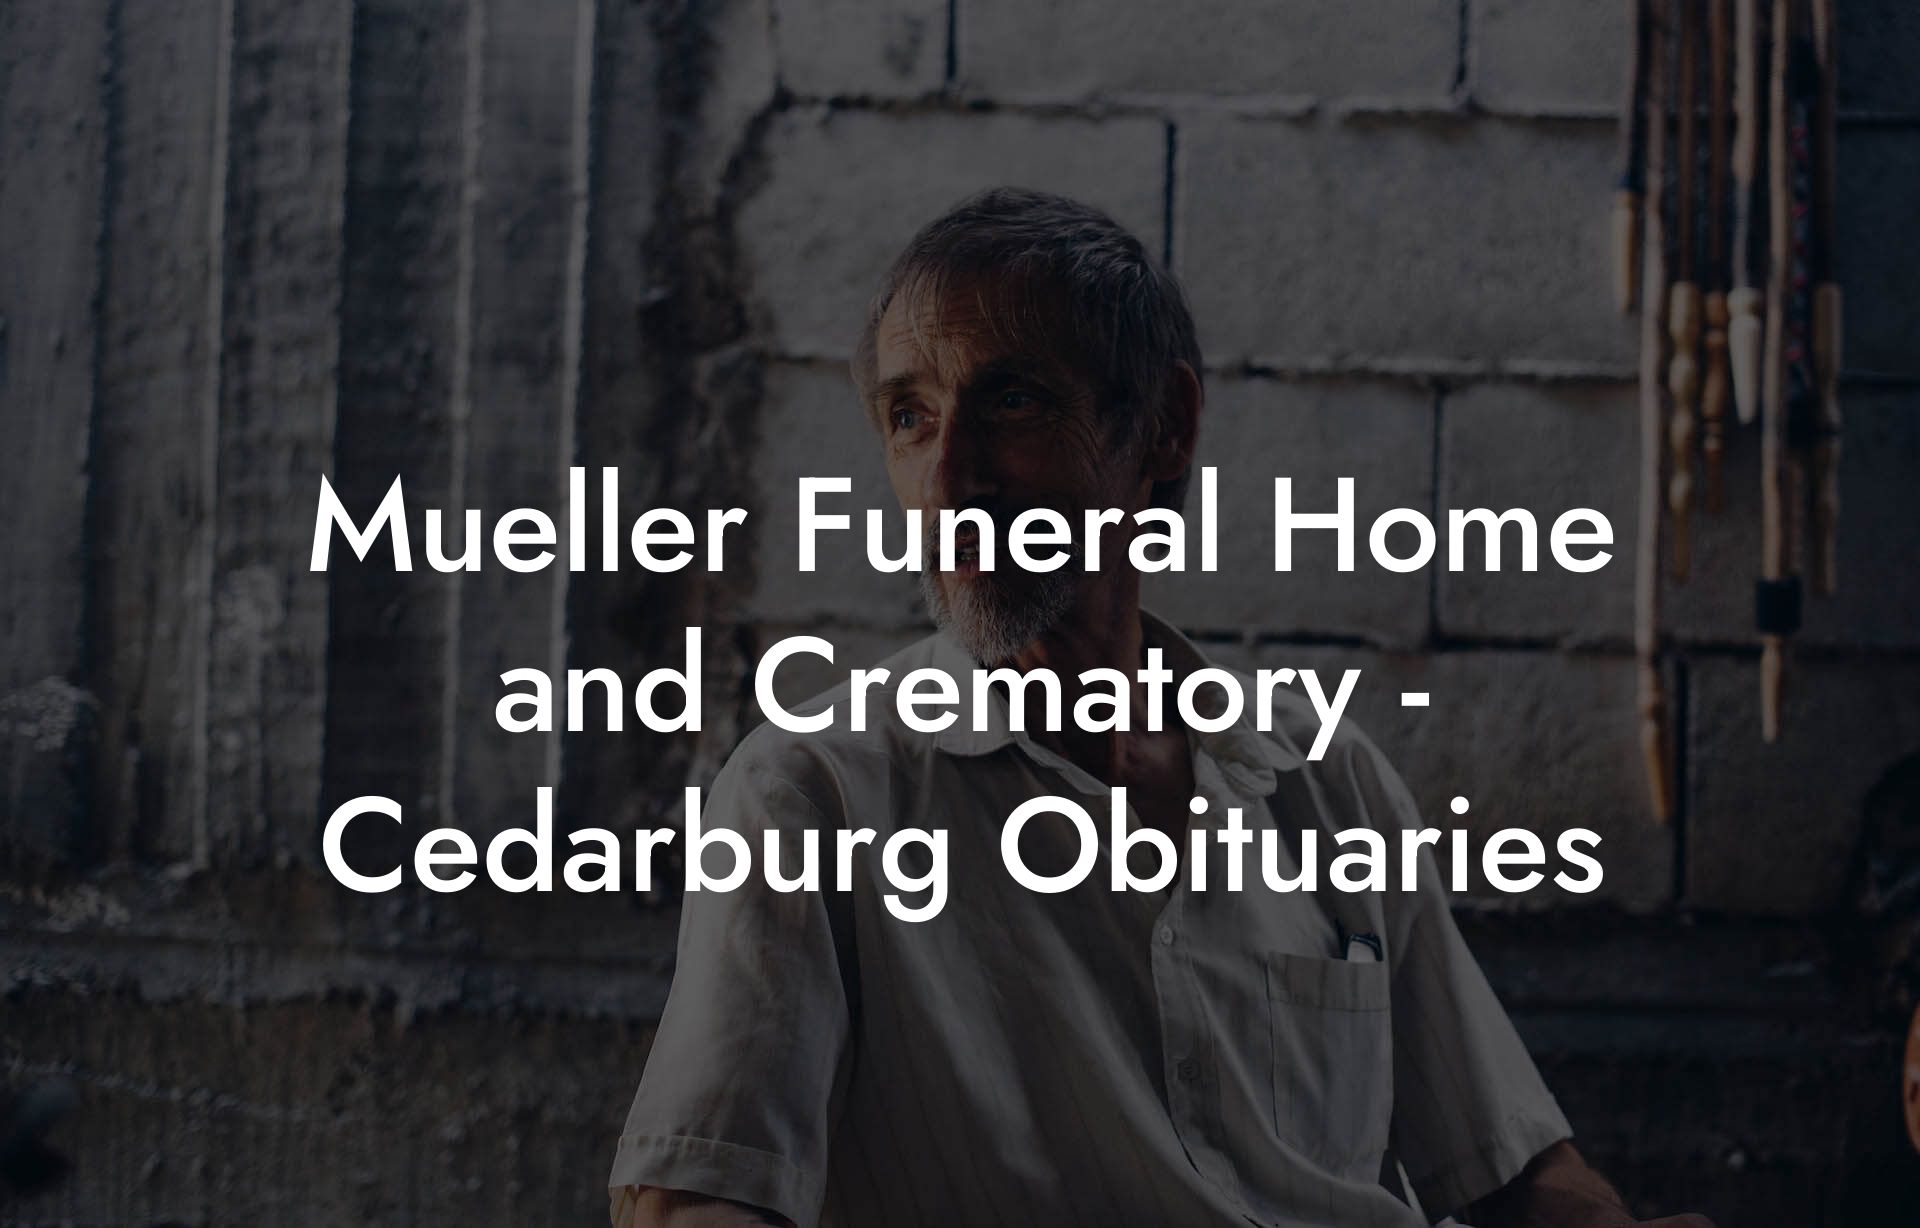 Mueller Funeral Home and Crematory - Cedarburg Obituaries